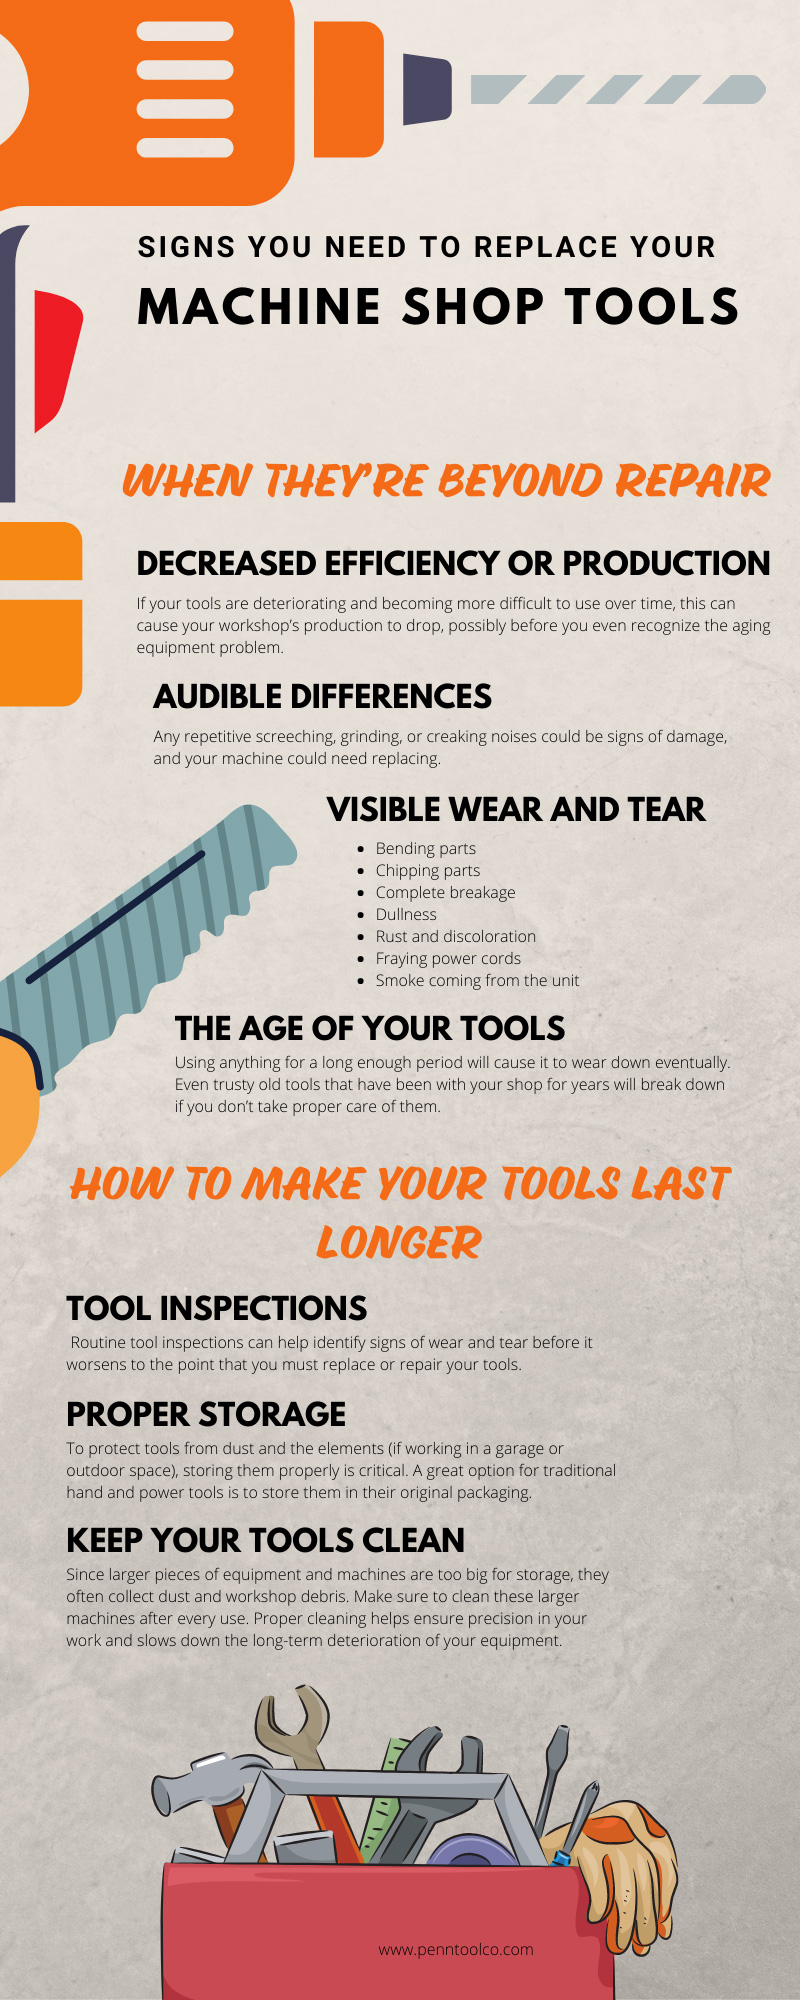 Signs You Need To Replace Your Machine Shop Tools